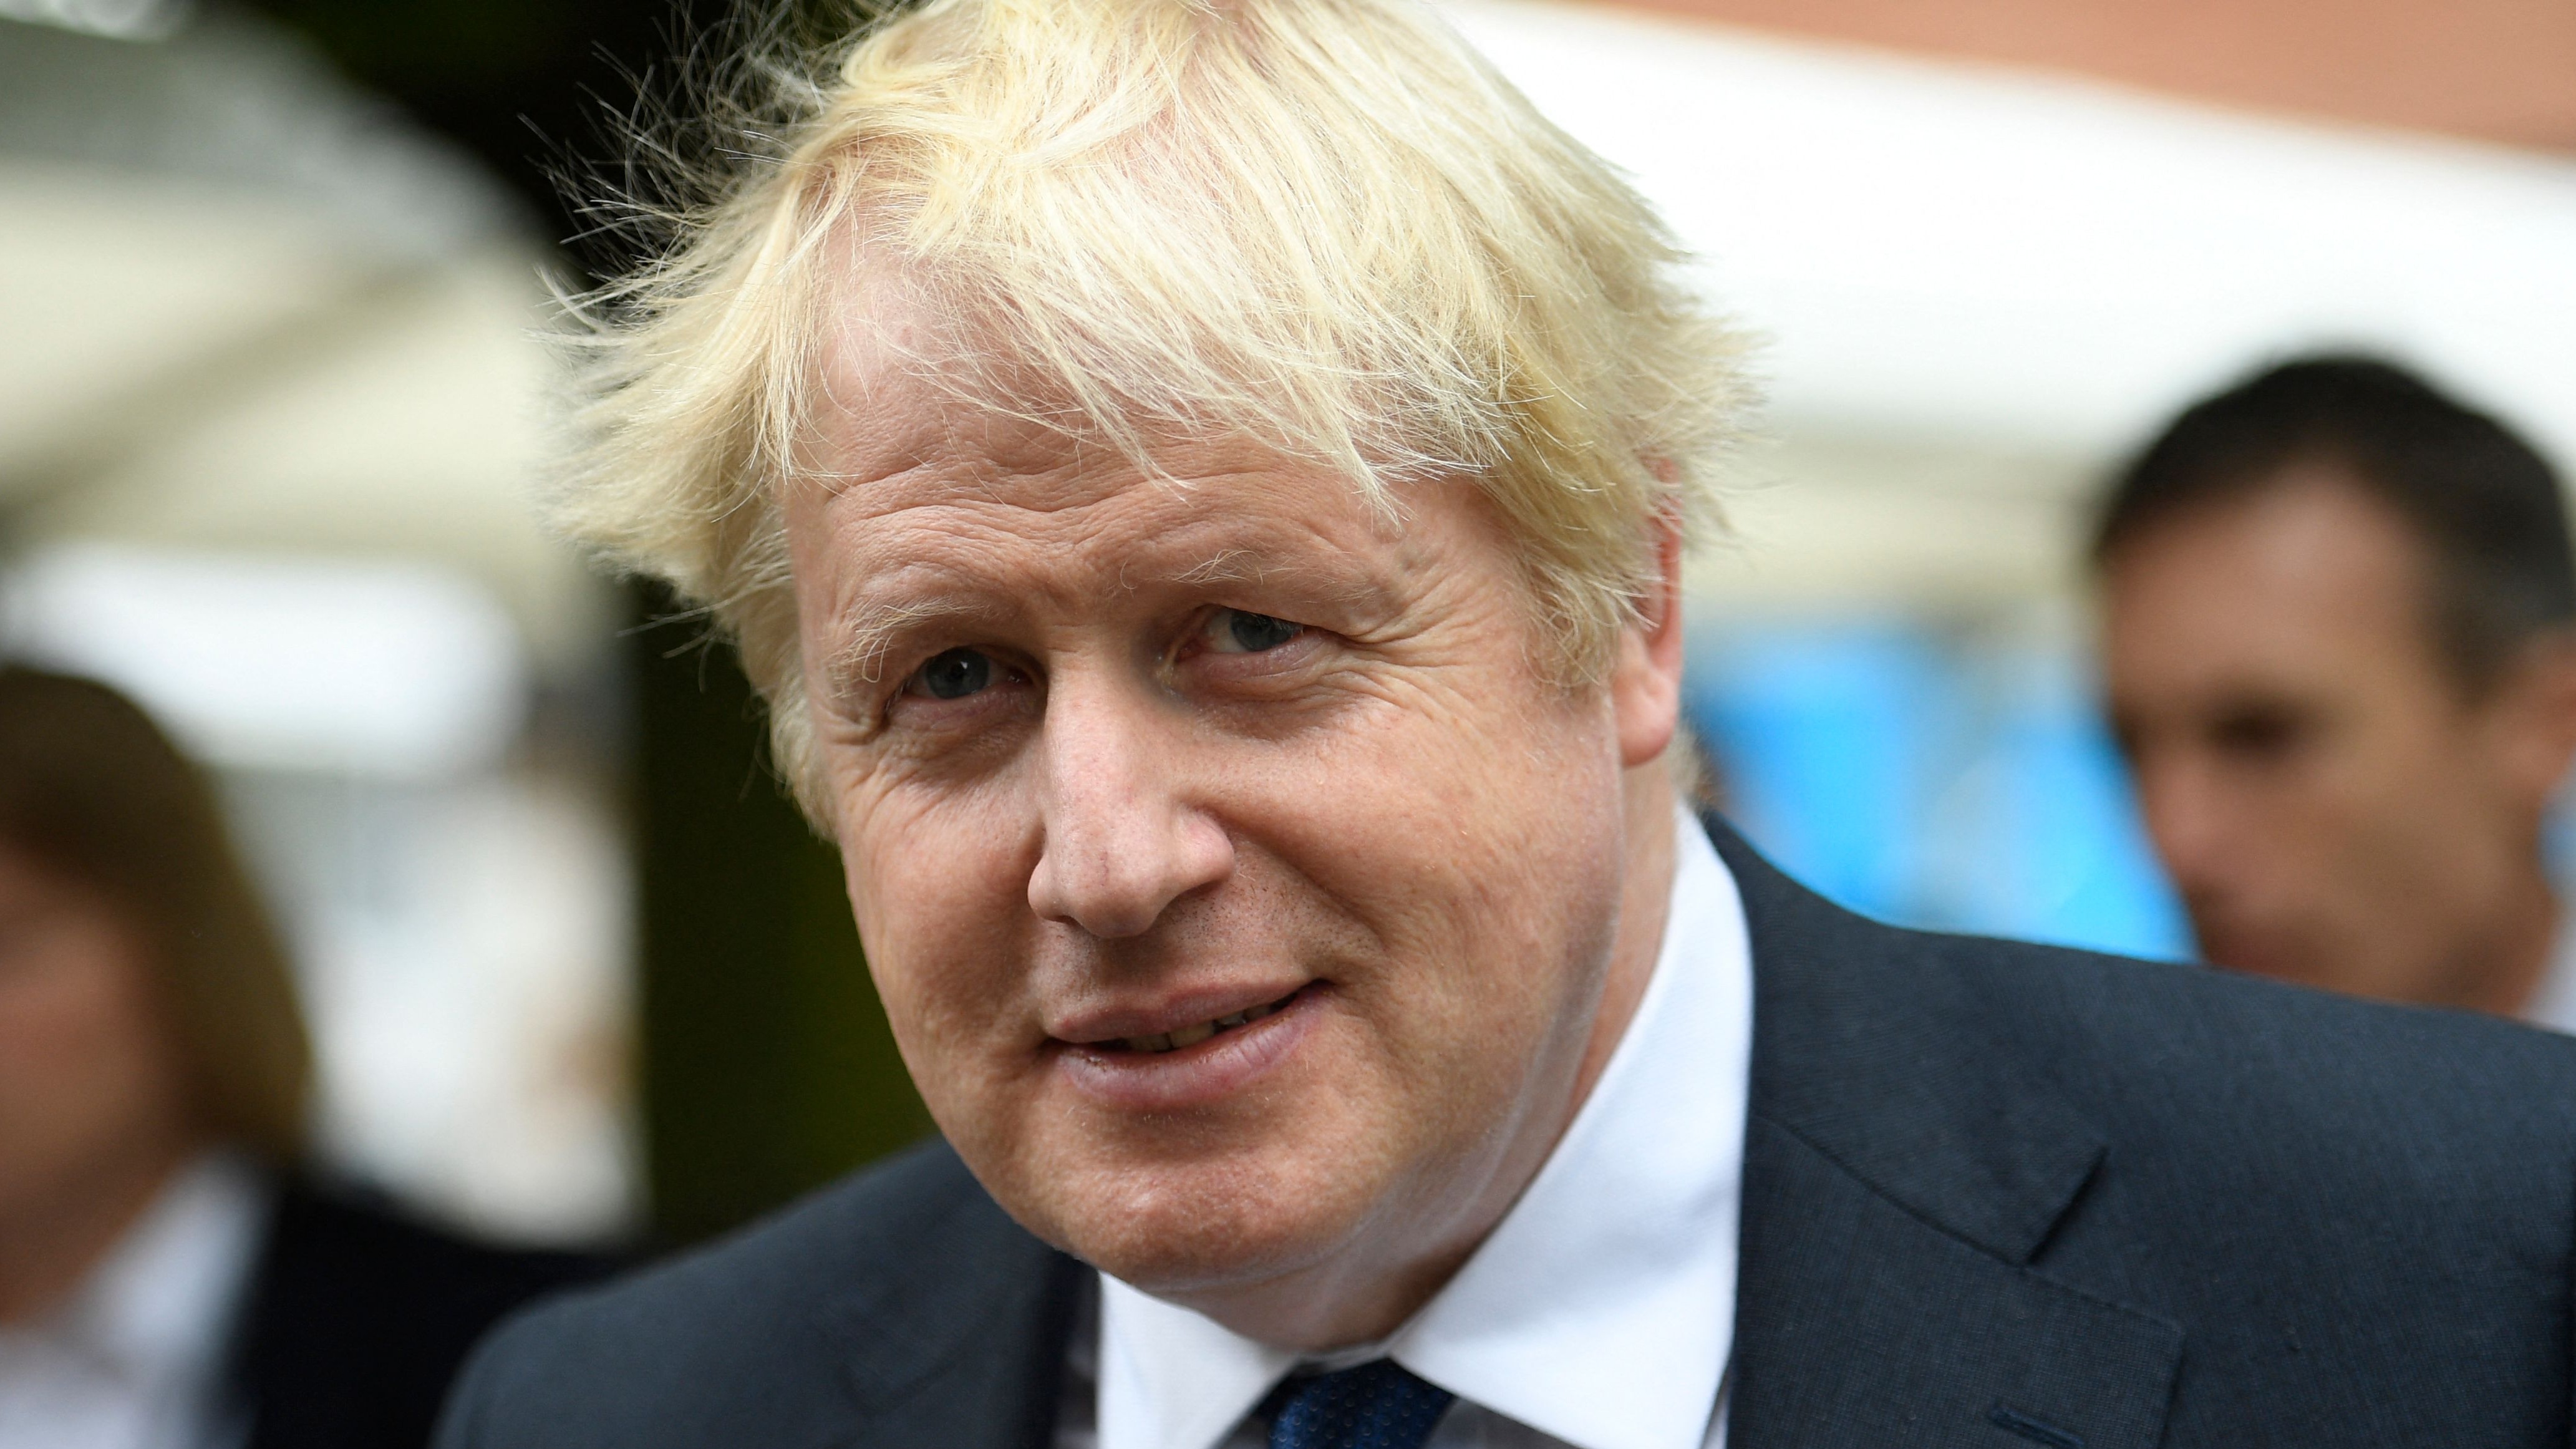 Boris Johnson during the Conservative Party conference in Manchester